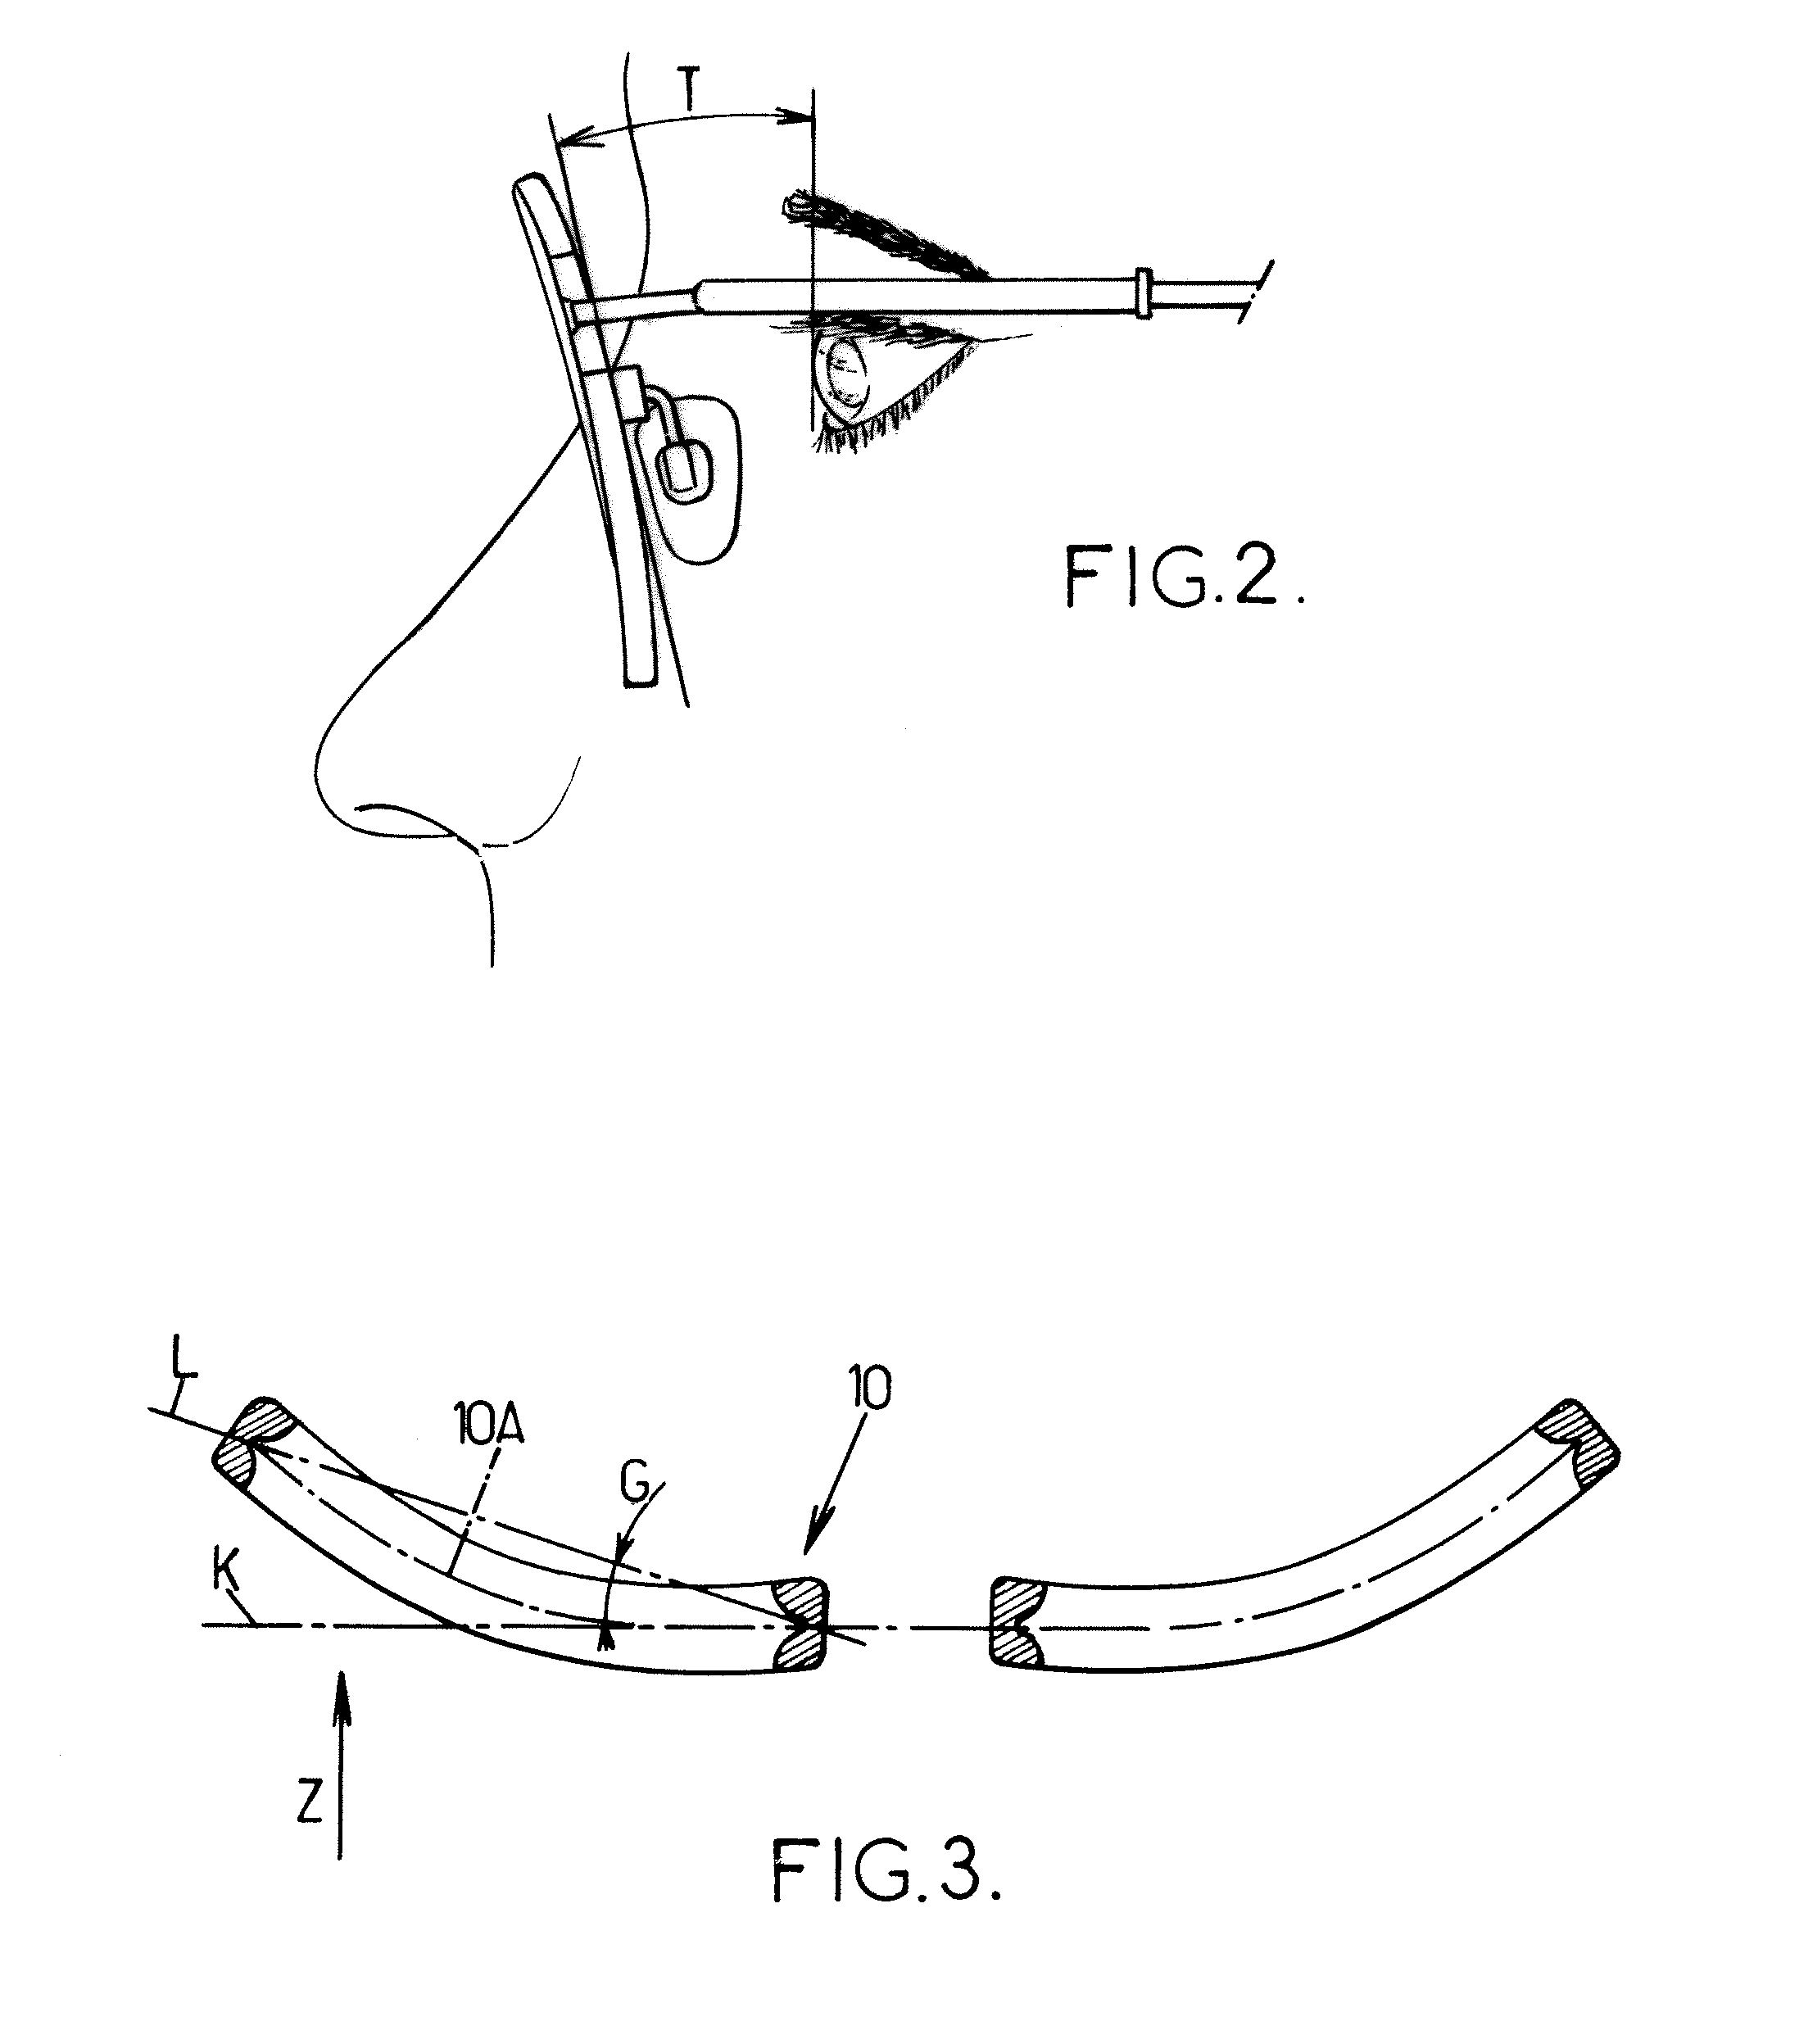 Method for Determining the Inset of a Progressive Addition Lens